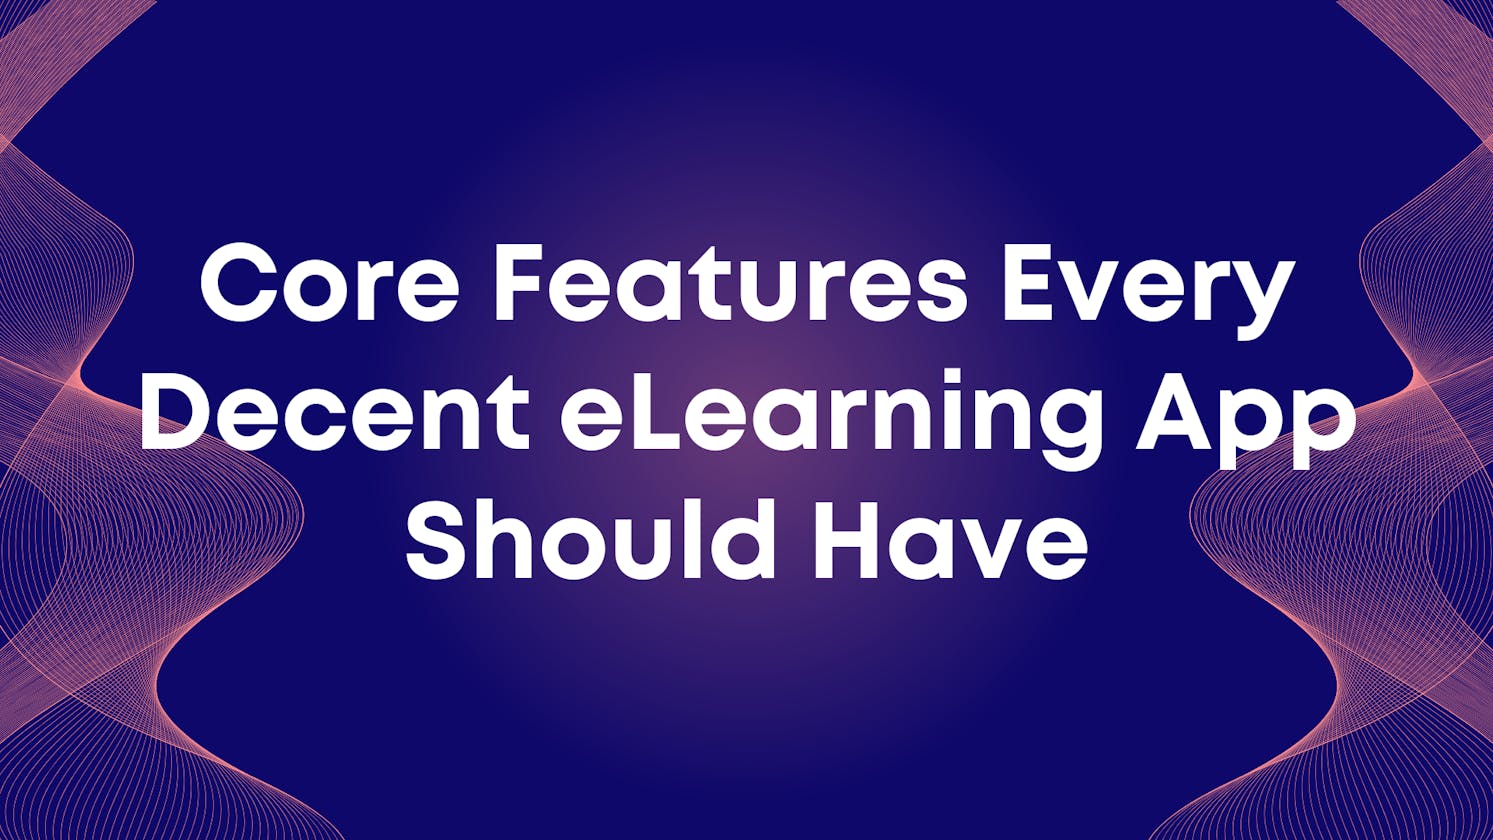 Core Features Every Decent eLearning App Should Have